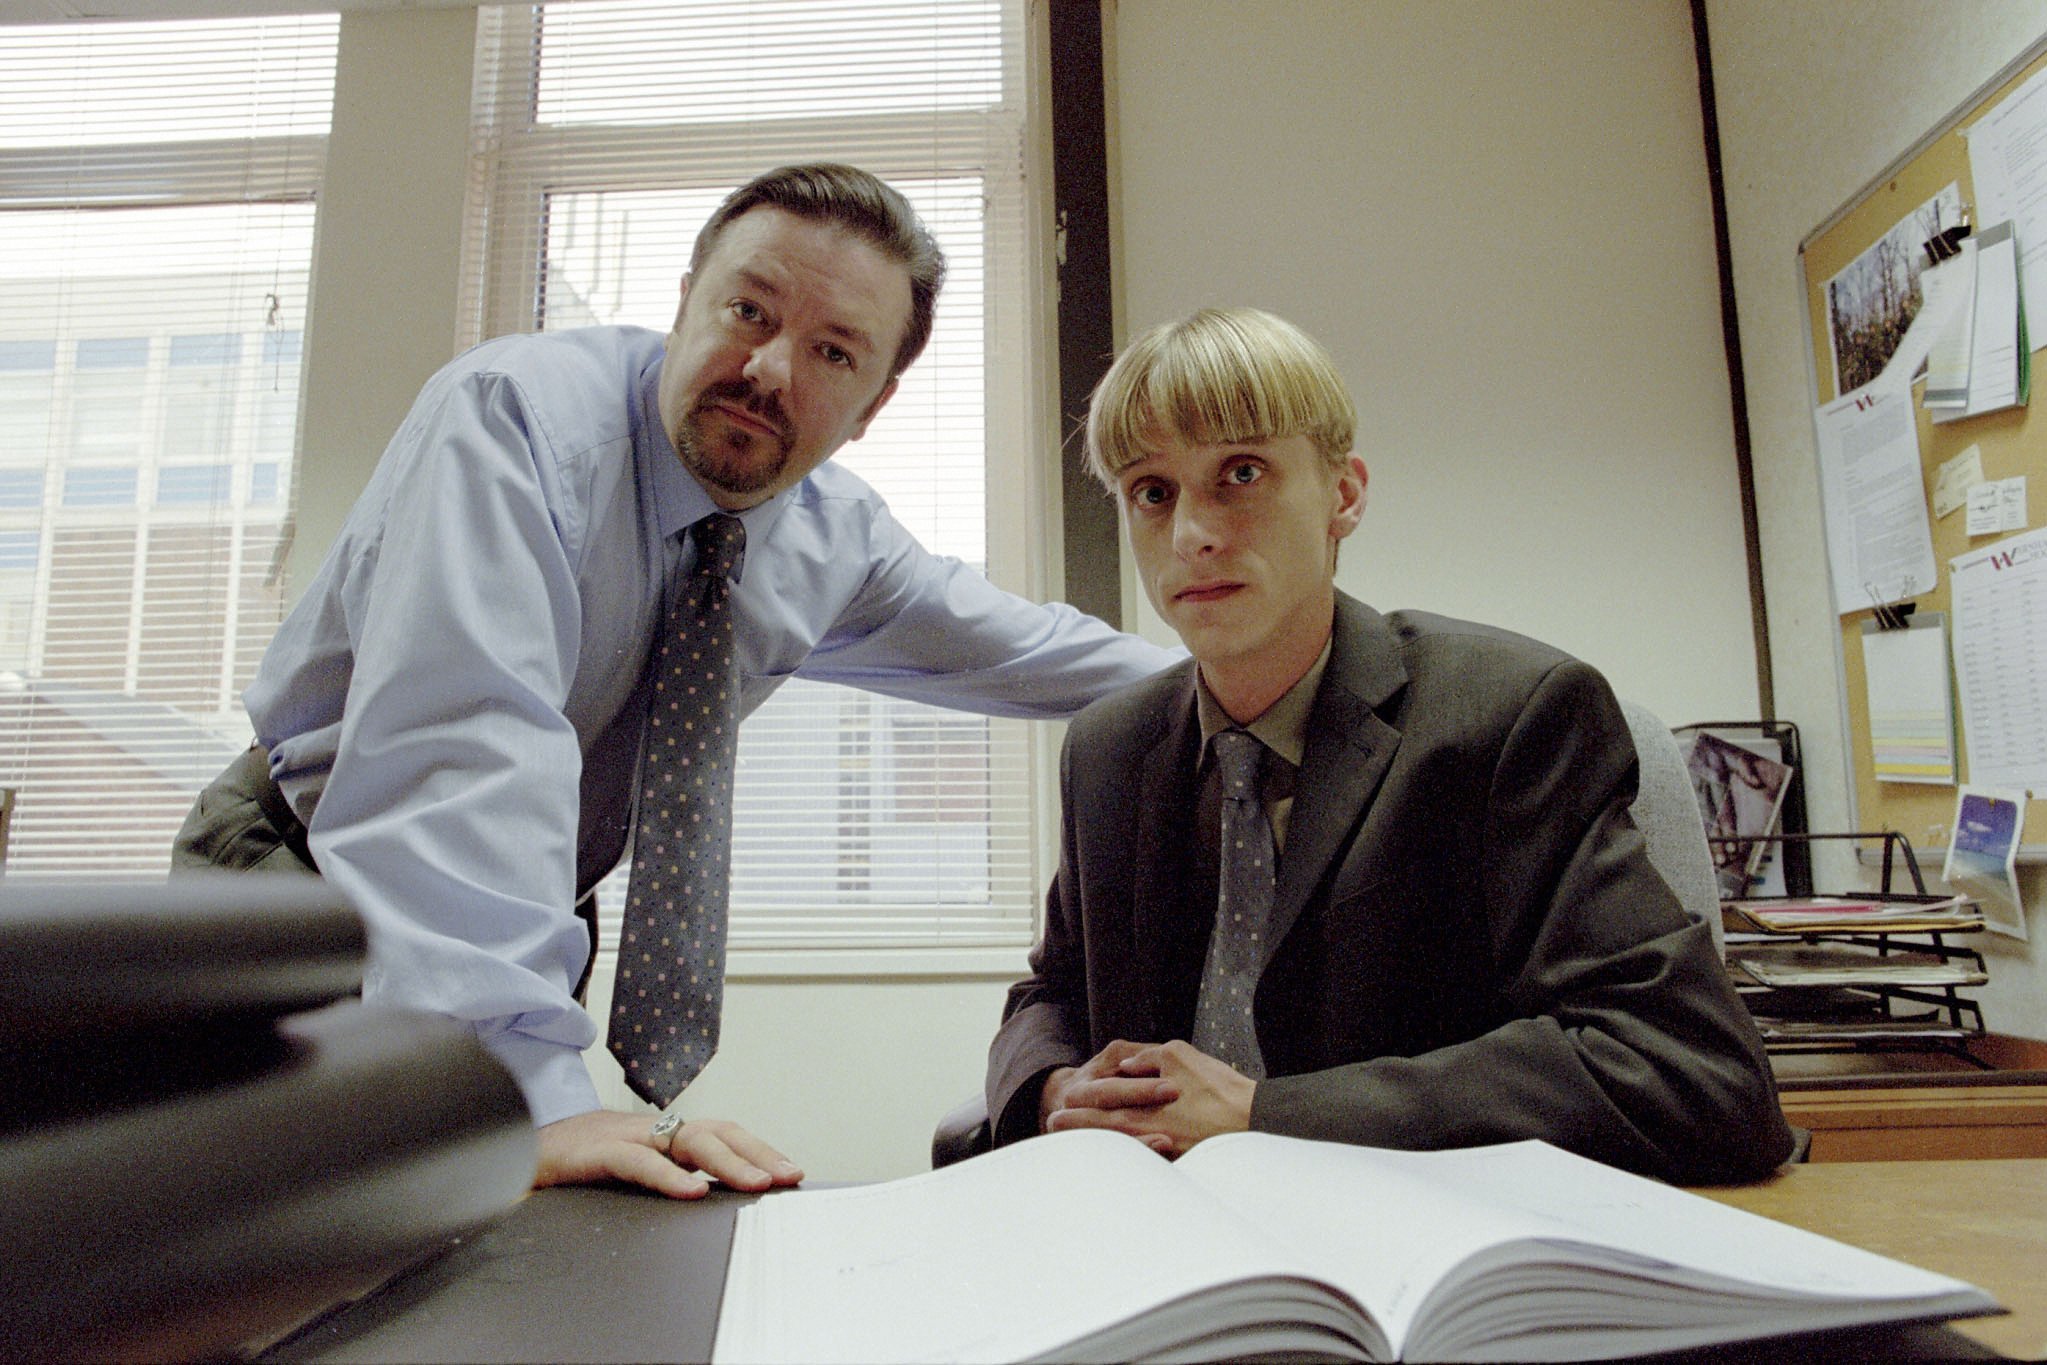 Ricky Gervais as manager David Brent and MacKenzie Crook as Gareth Keenan his assistant in The Office